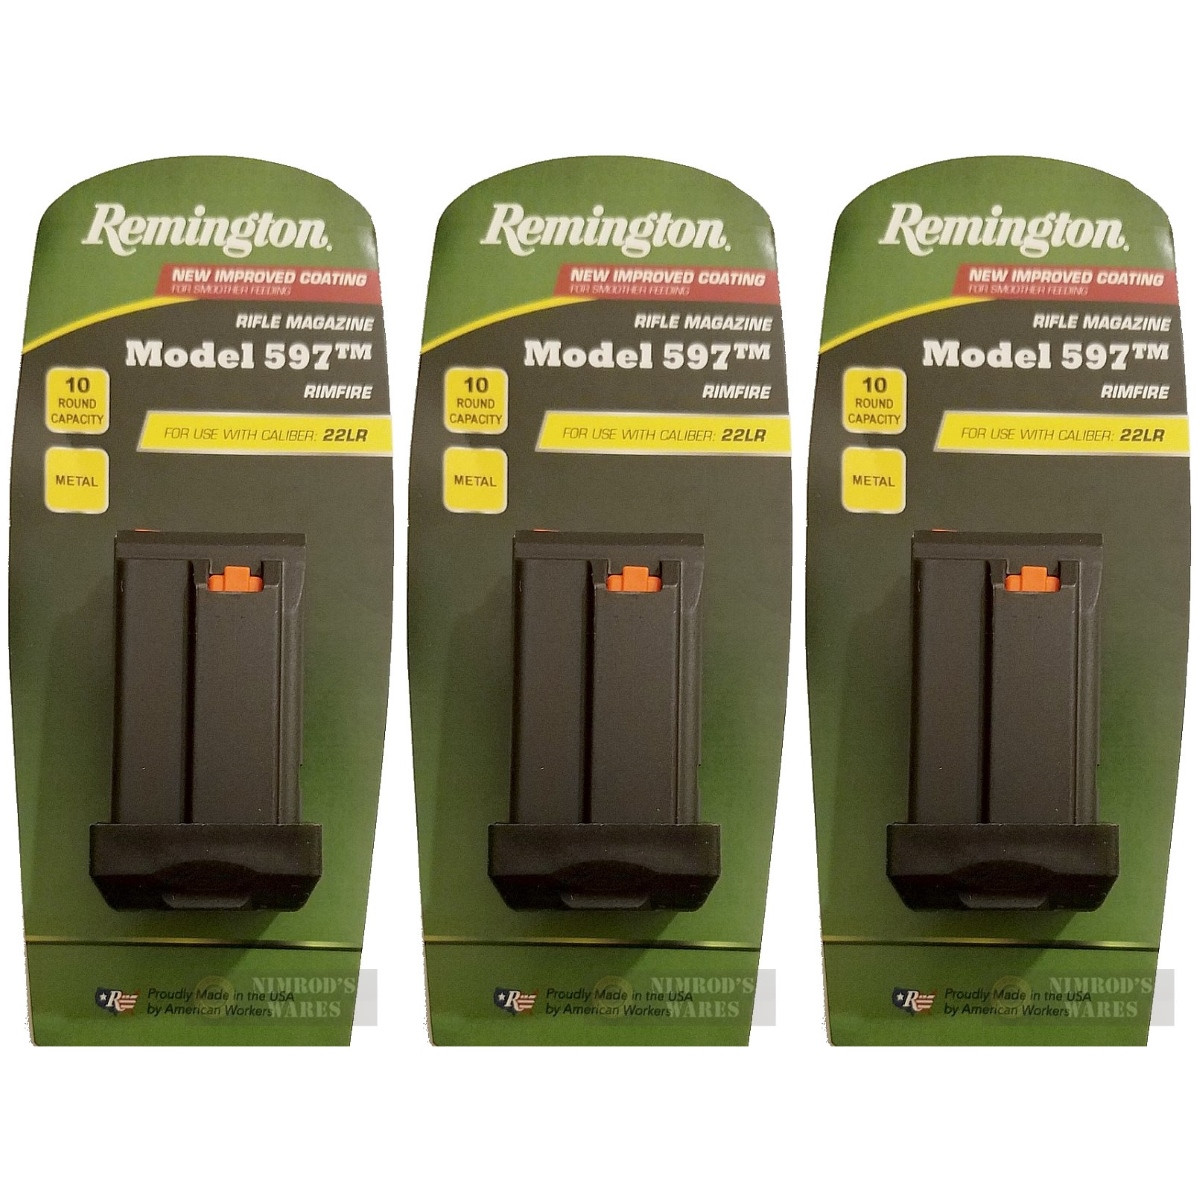 TWO IMPROVED Remington 597 Magazine Mag .22 22 LR 10 Rd CLIP 19654 